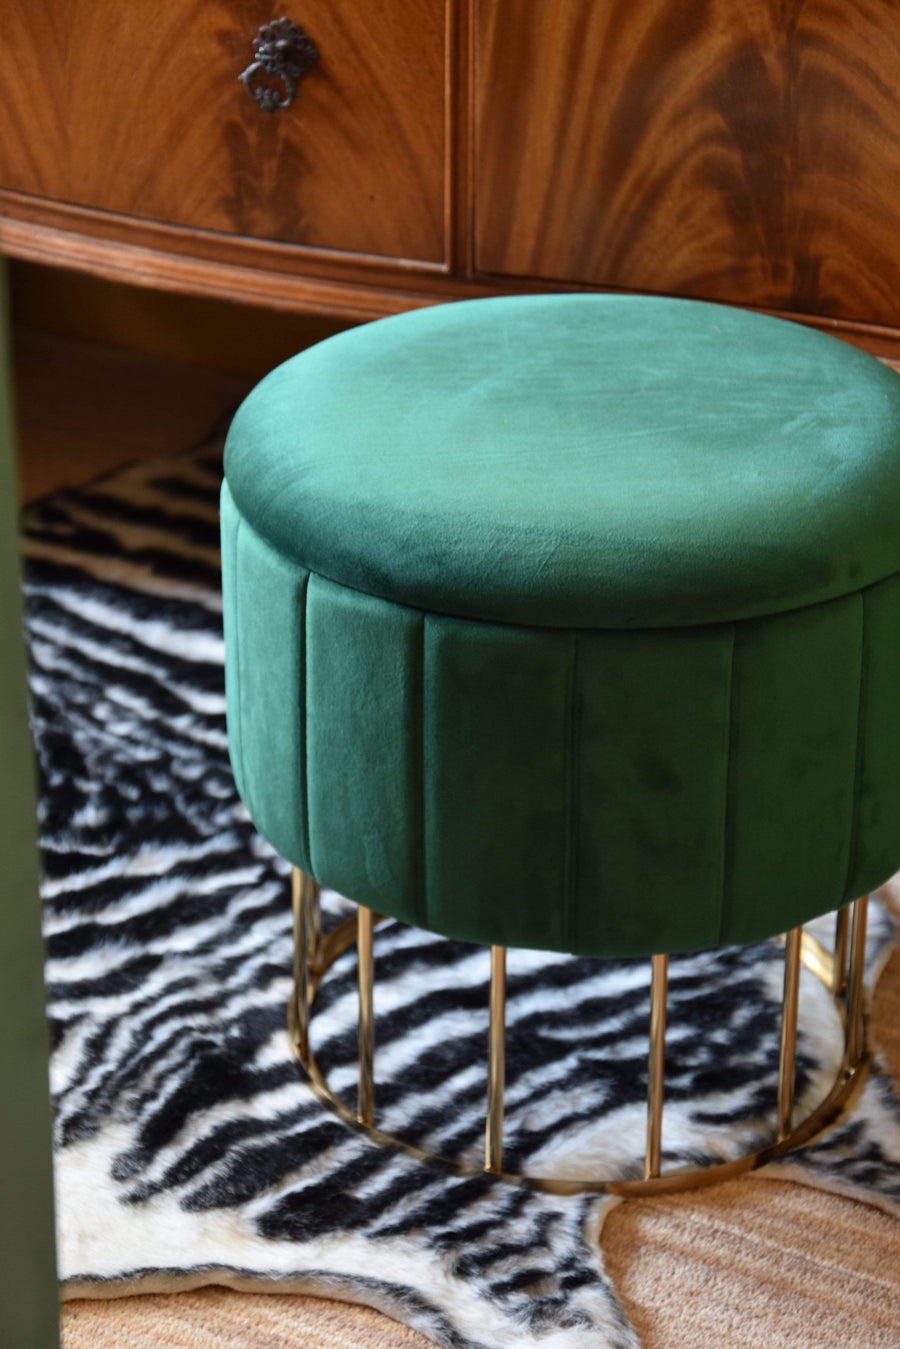 ESME Home ROUND METAL STORAGE OTTOMAN - EMERALD GREEN IN MAIL ORDER PACKAGING - KD